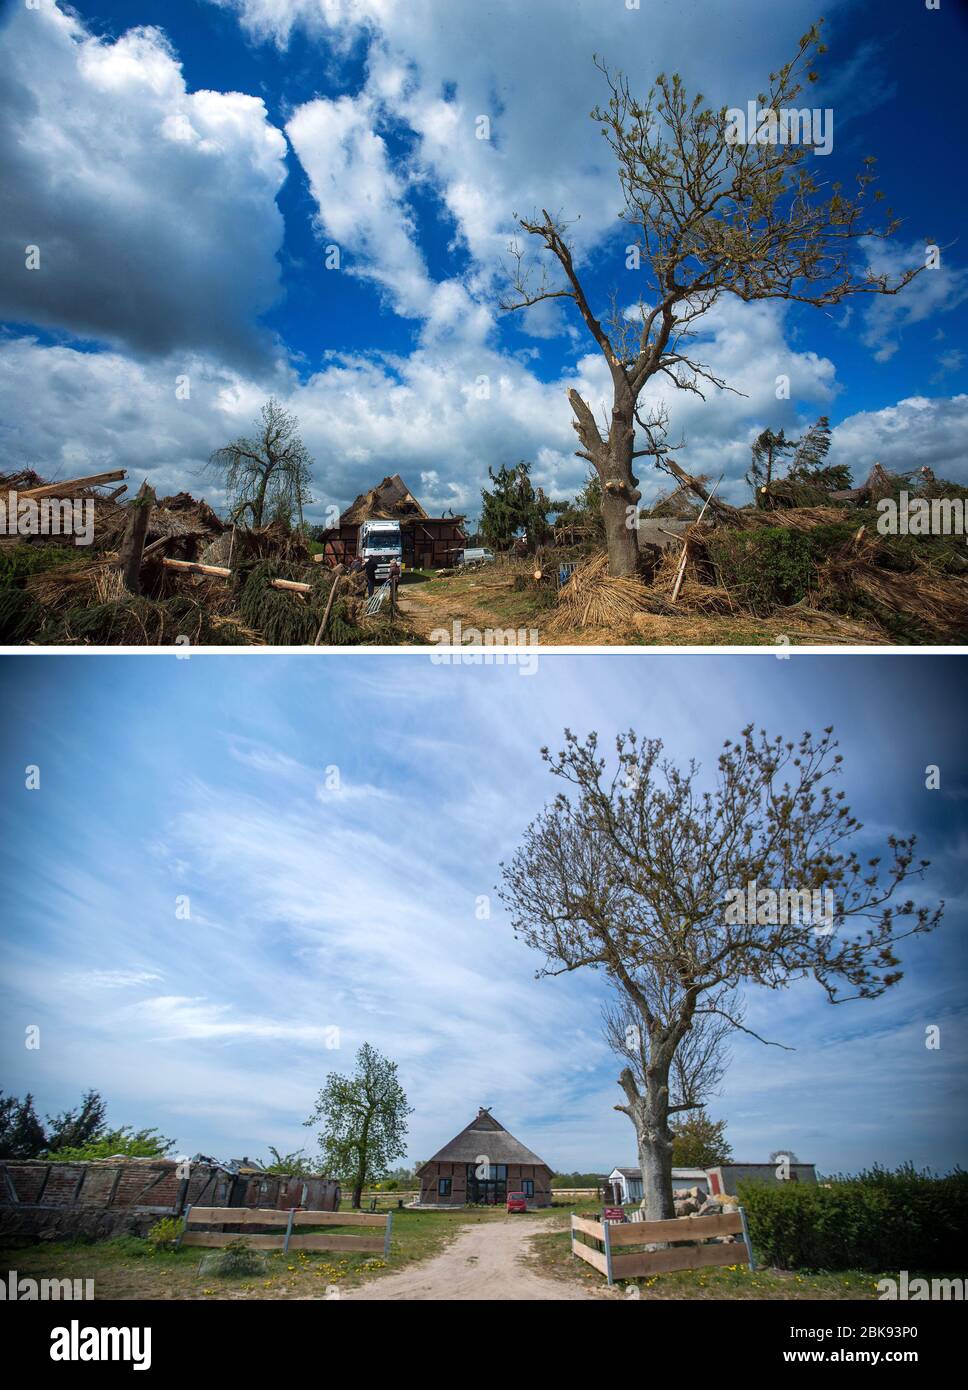 29 April 2020, Mecklenburg-Western Pomerania, Bützow: KOMBO - The thatched  roof farmhouse of the Götze family in Rühn, completely destroyed by the  tornado, taken on 06.05.2015 (above) and after reconstruction on 29.04.2020.